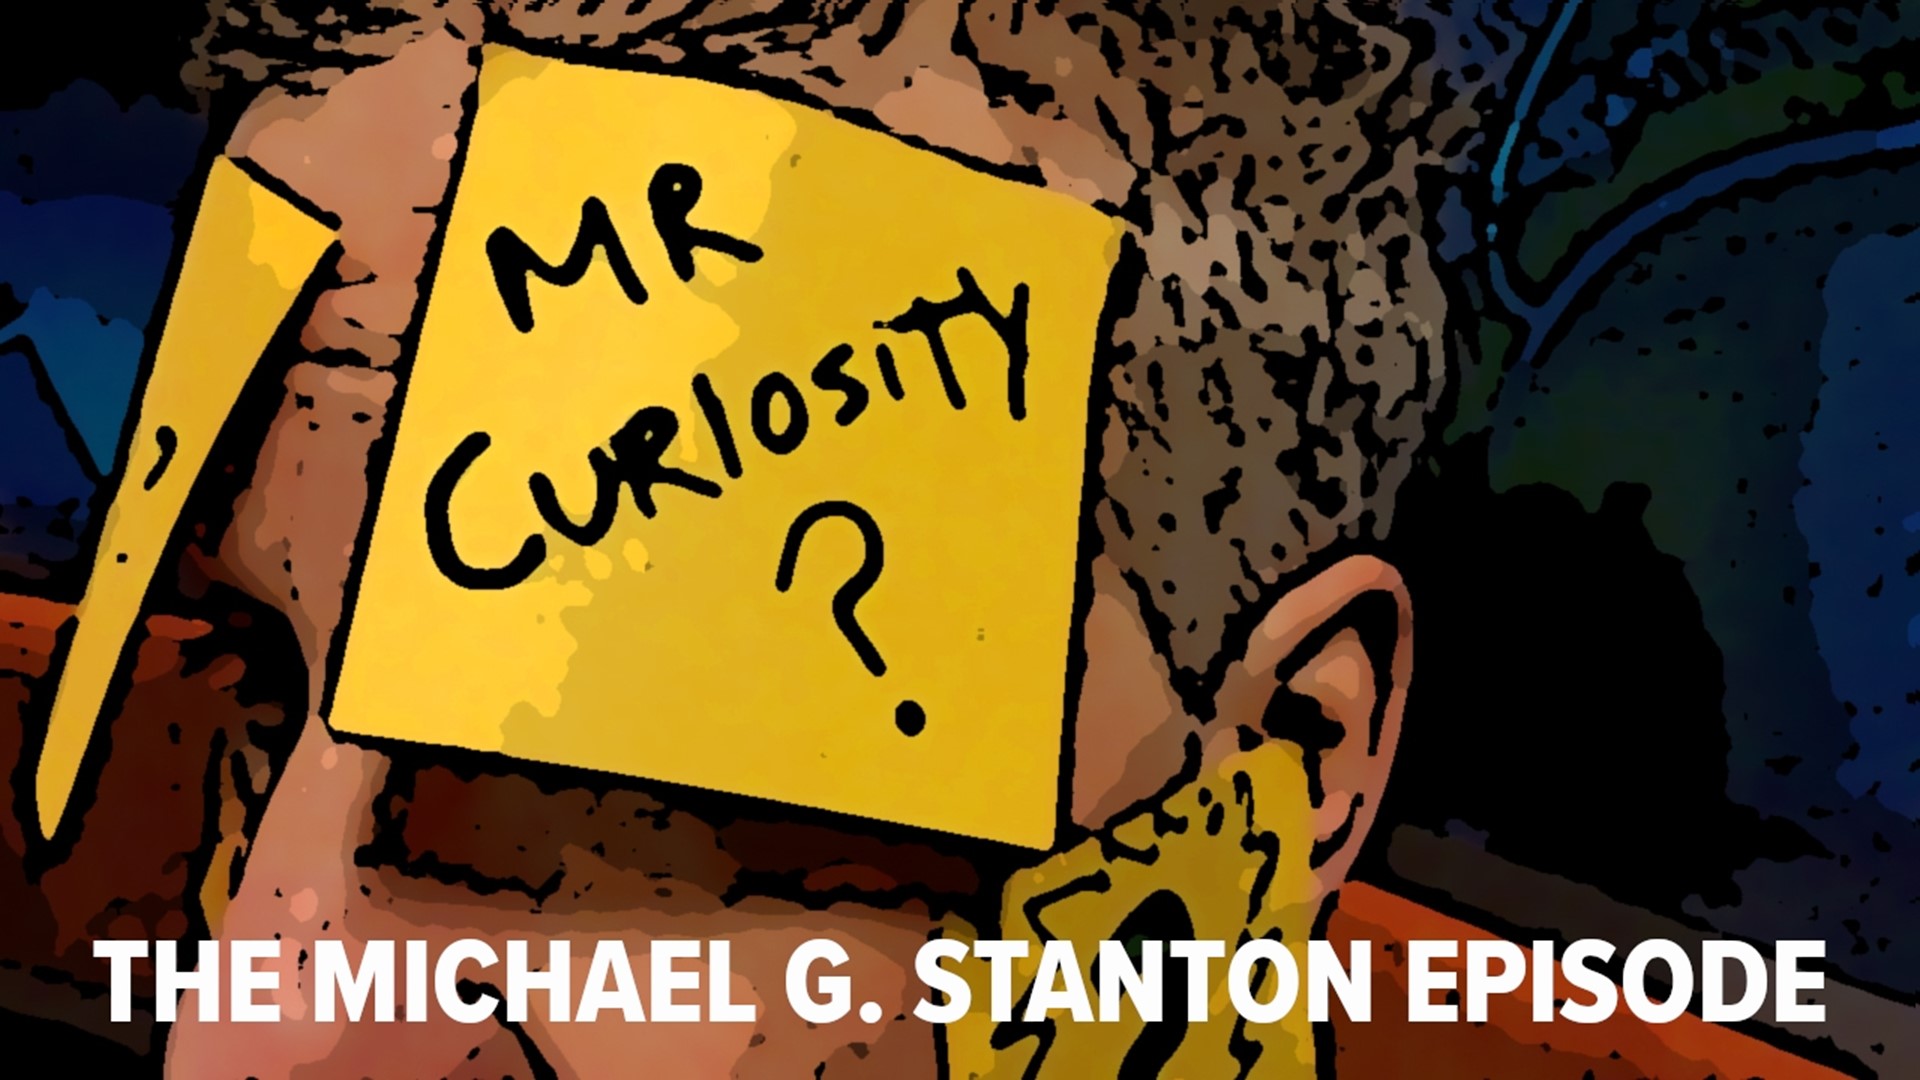 In this episode, the tables are turned when Joe's guest, Michael G. Stanton asks the questions.